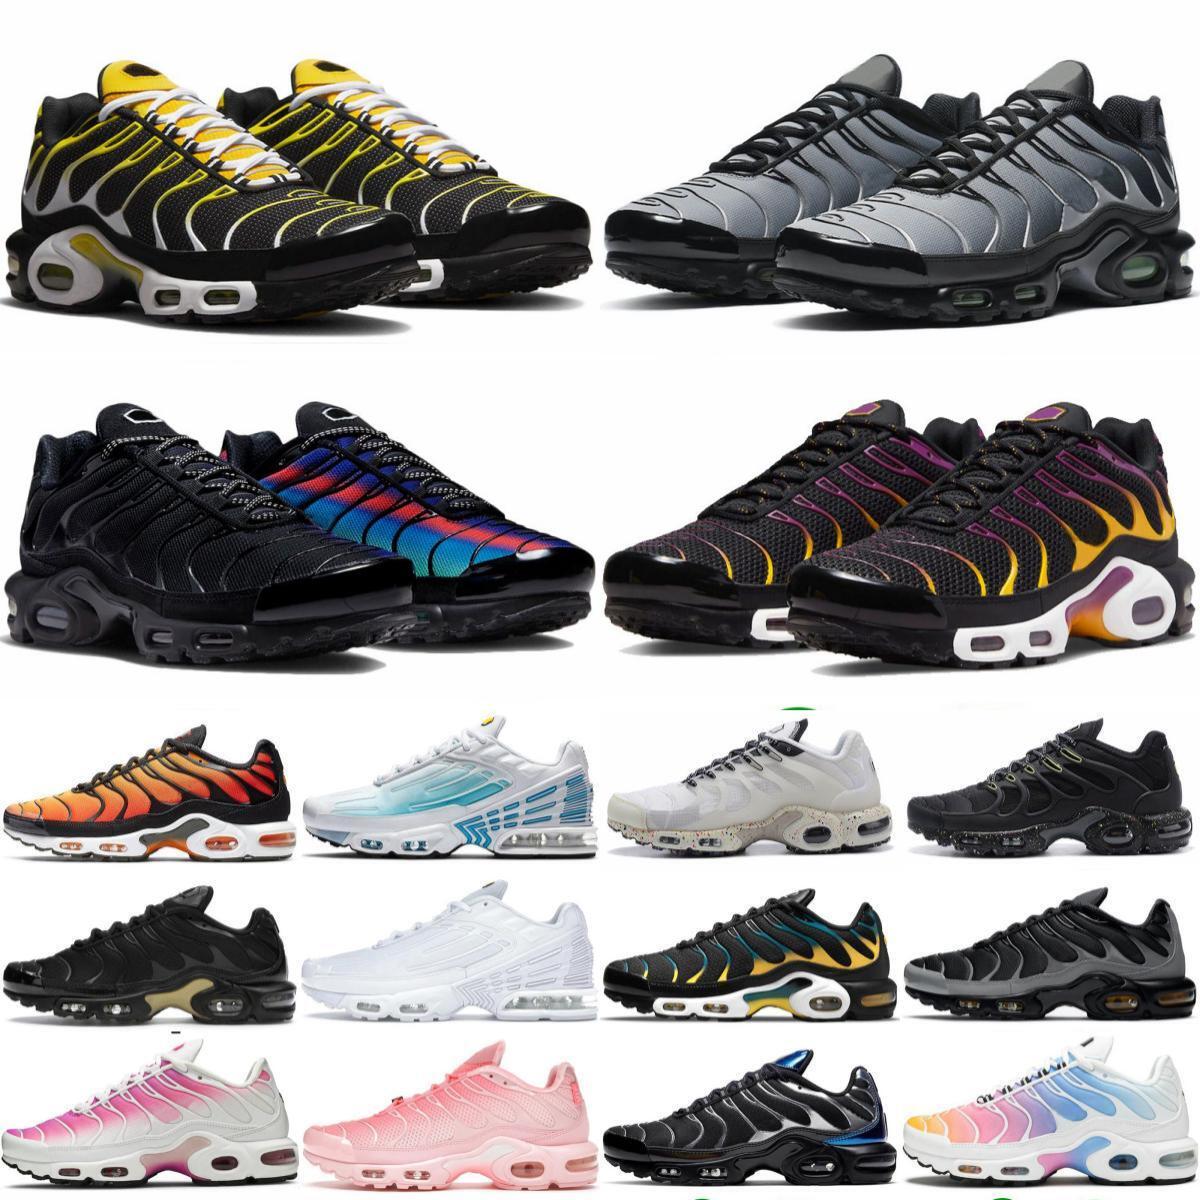 

tn terrascape plus 3 running shoes Tn mens women white pink Atlanta Laser Blue Volt Glow Oreo womens Breathable sneakers trainers outdoor sports EUR 36-46, Sku_41 36-45